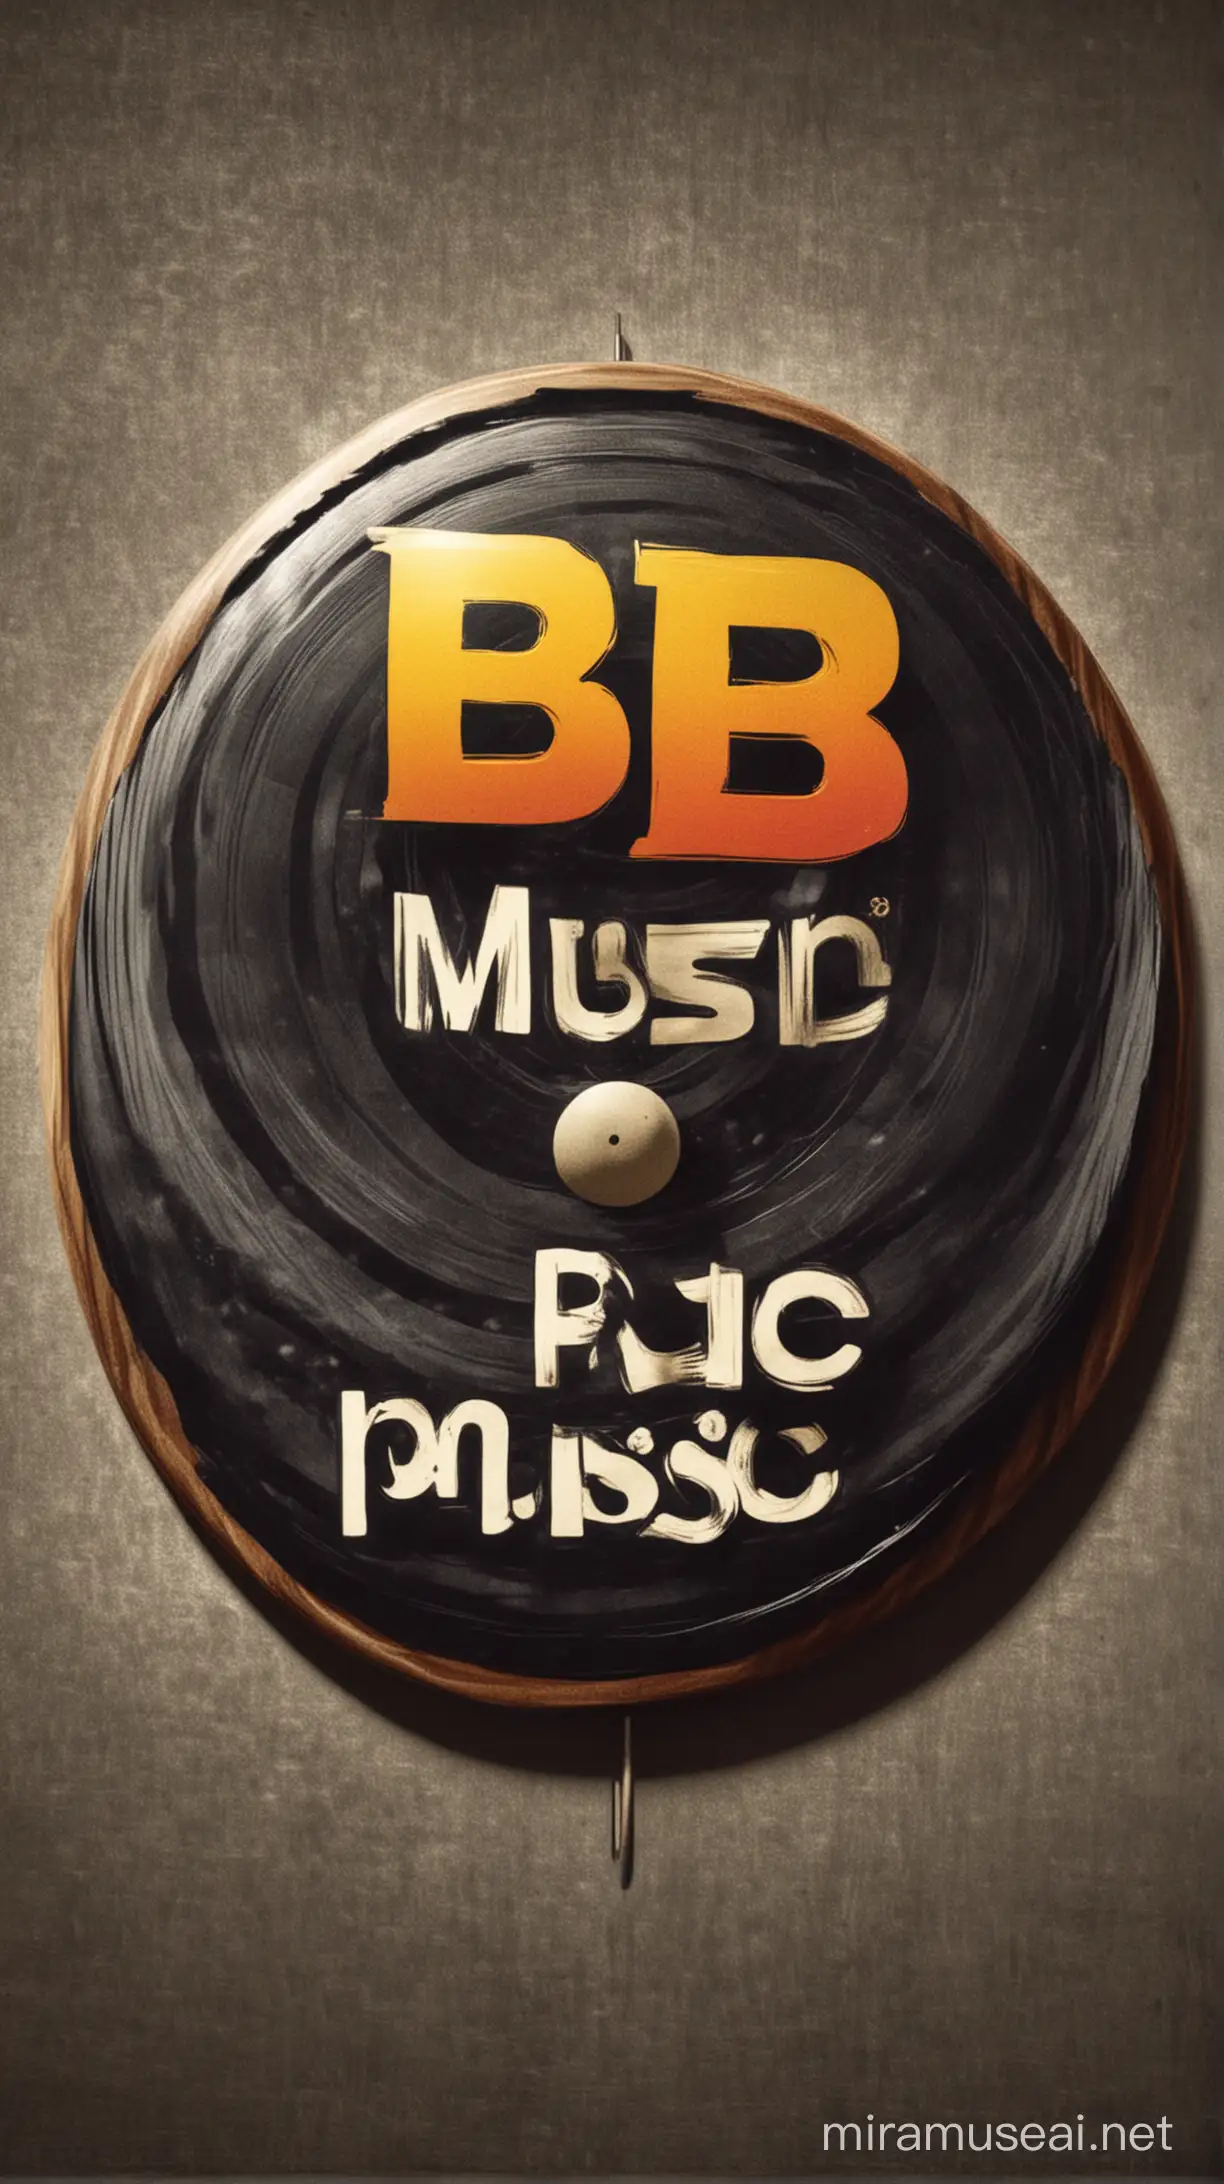 BB MUSIC Record Label Logo Design with Musical Notes and Vinyl Record